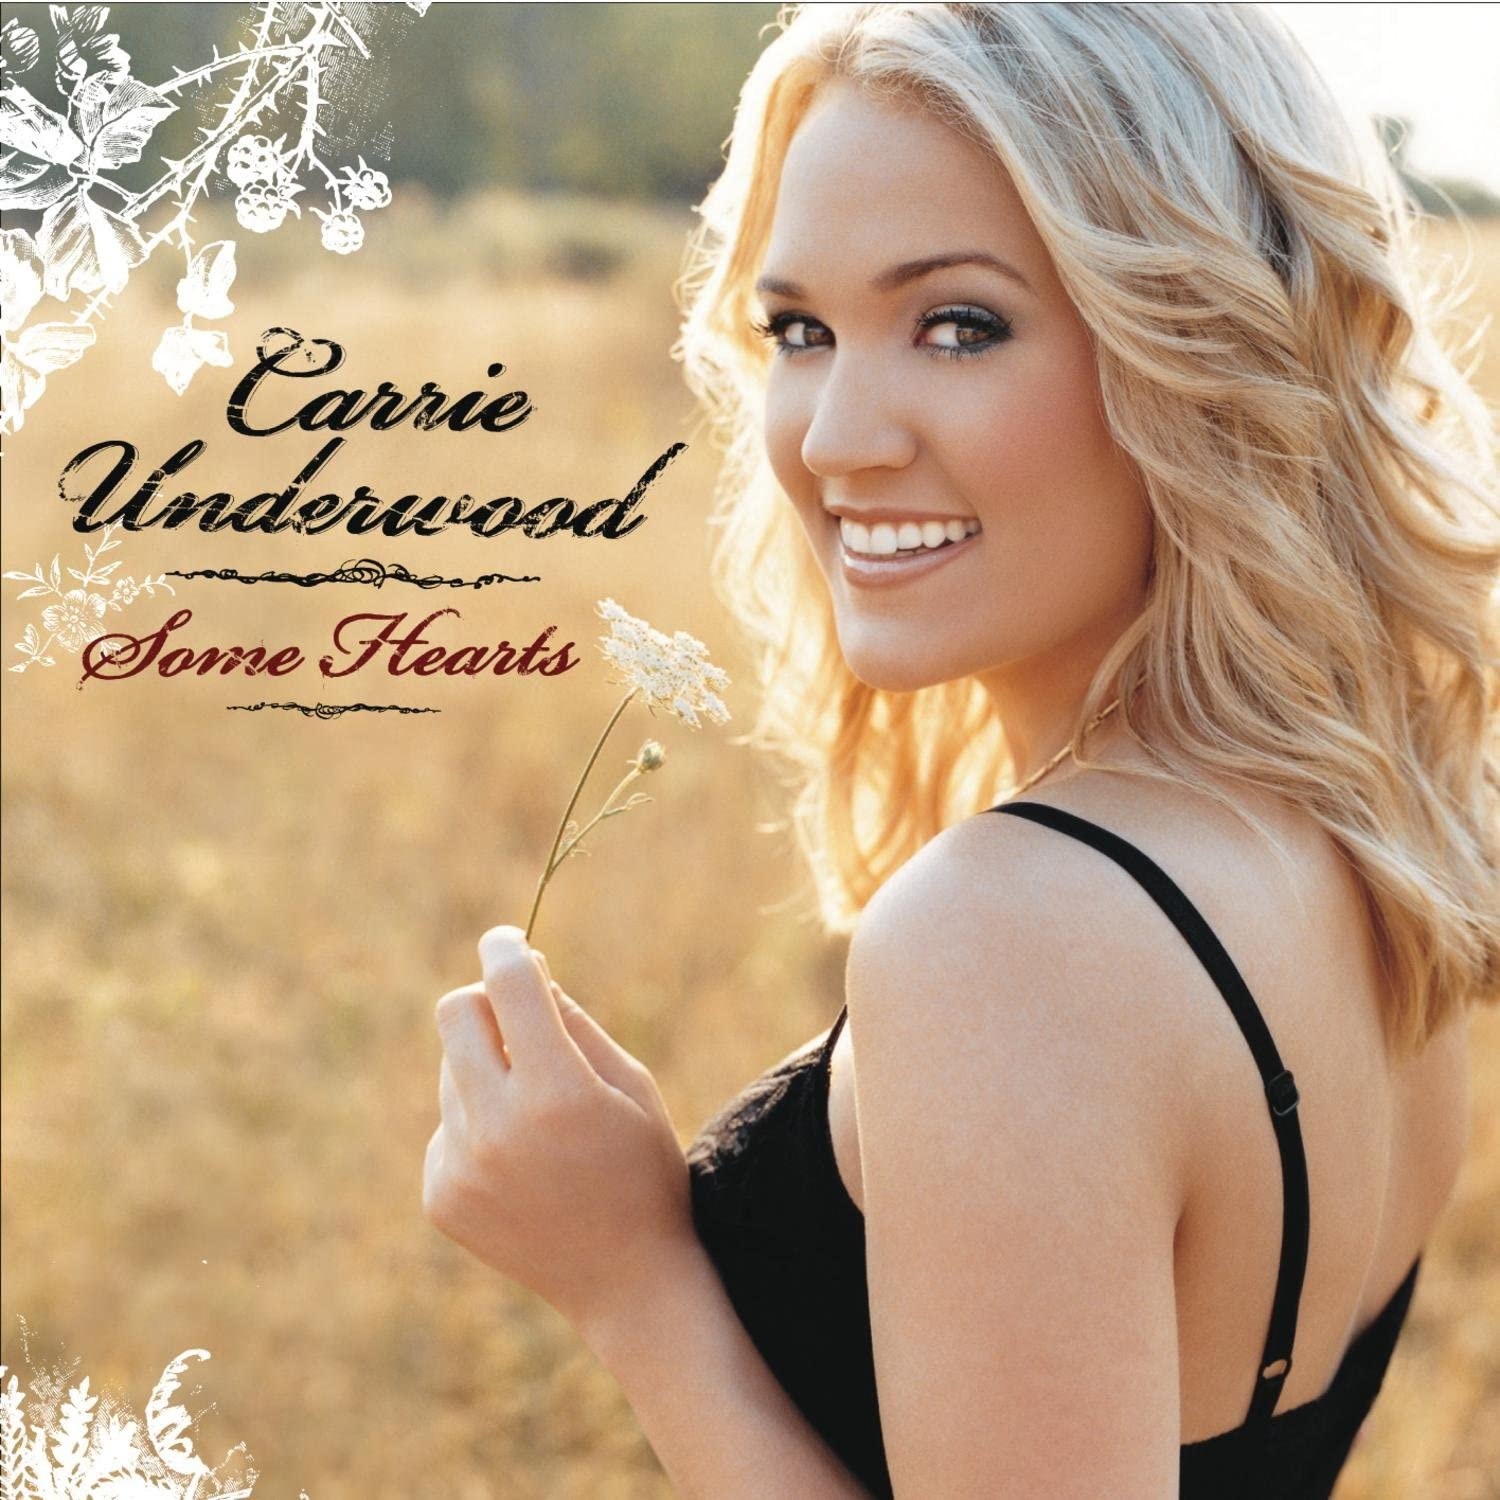 Carrie Underwood Some Hearts 